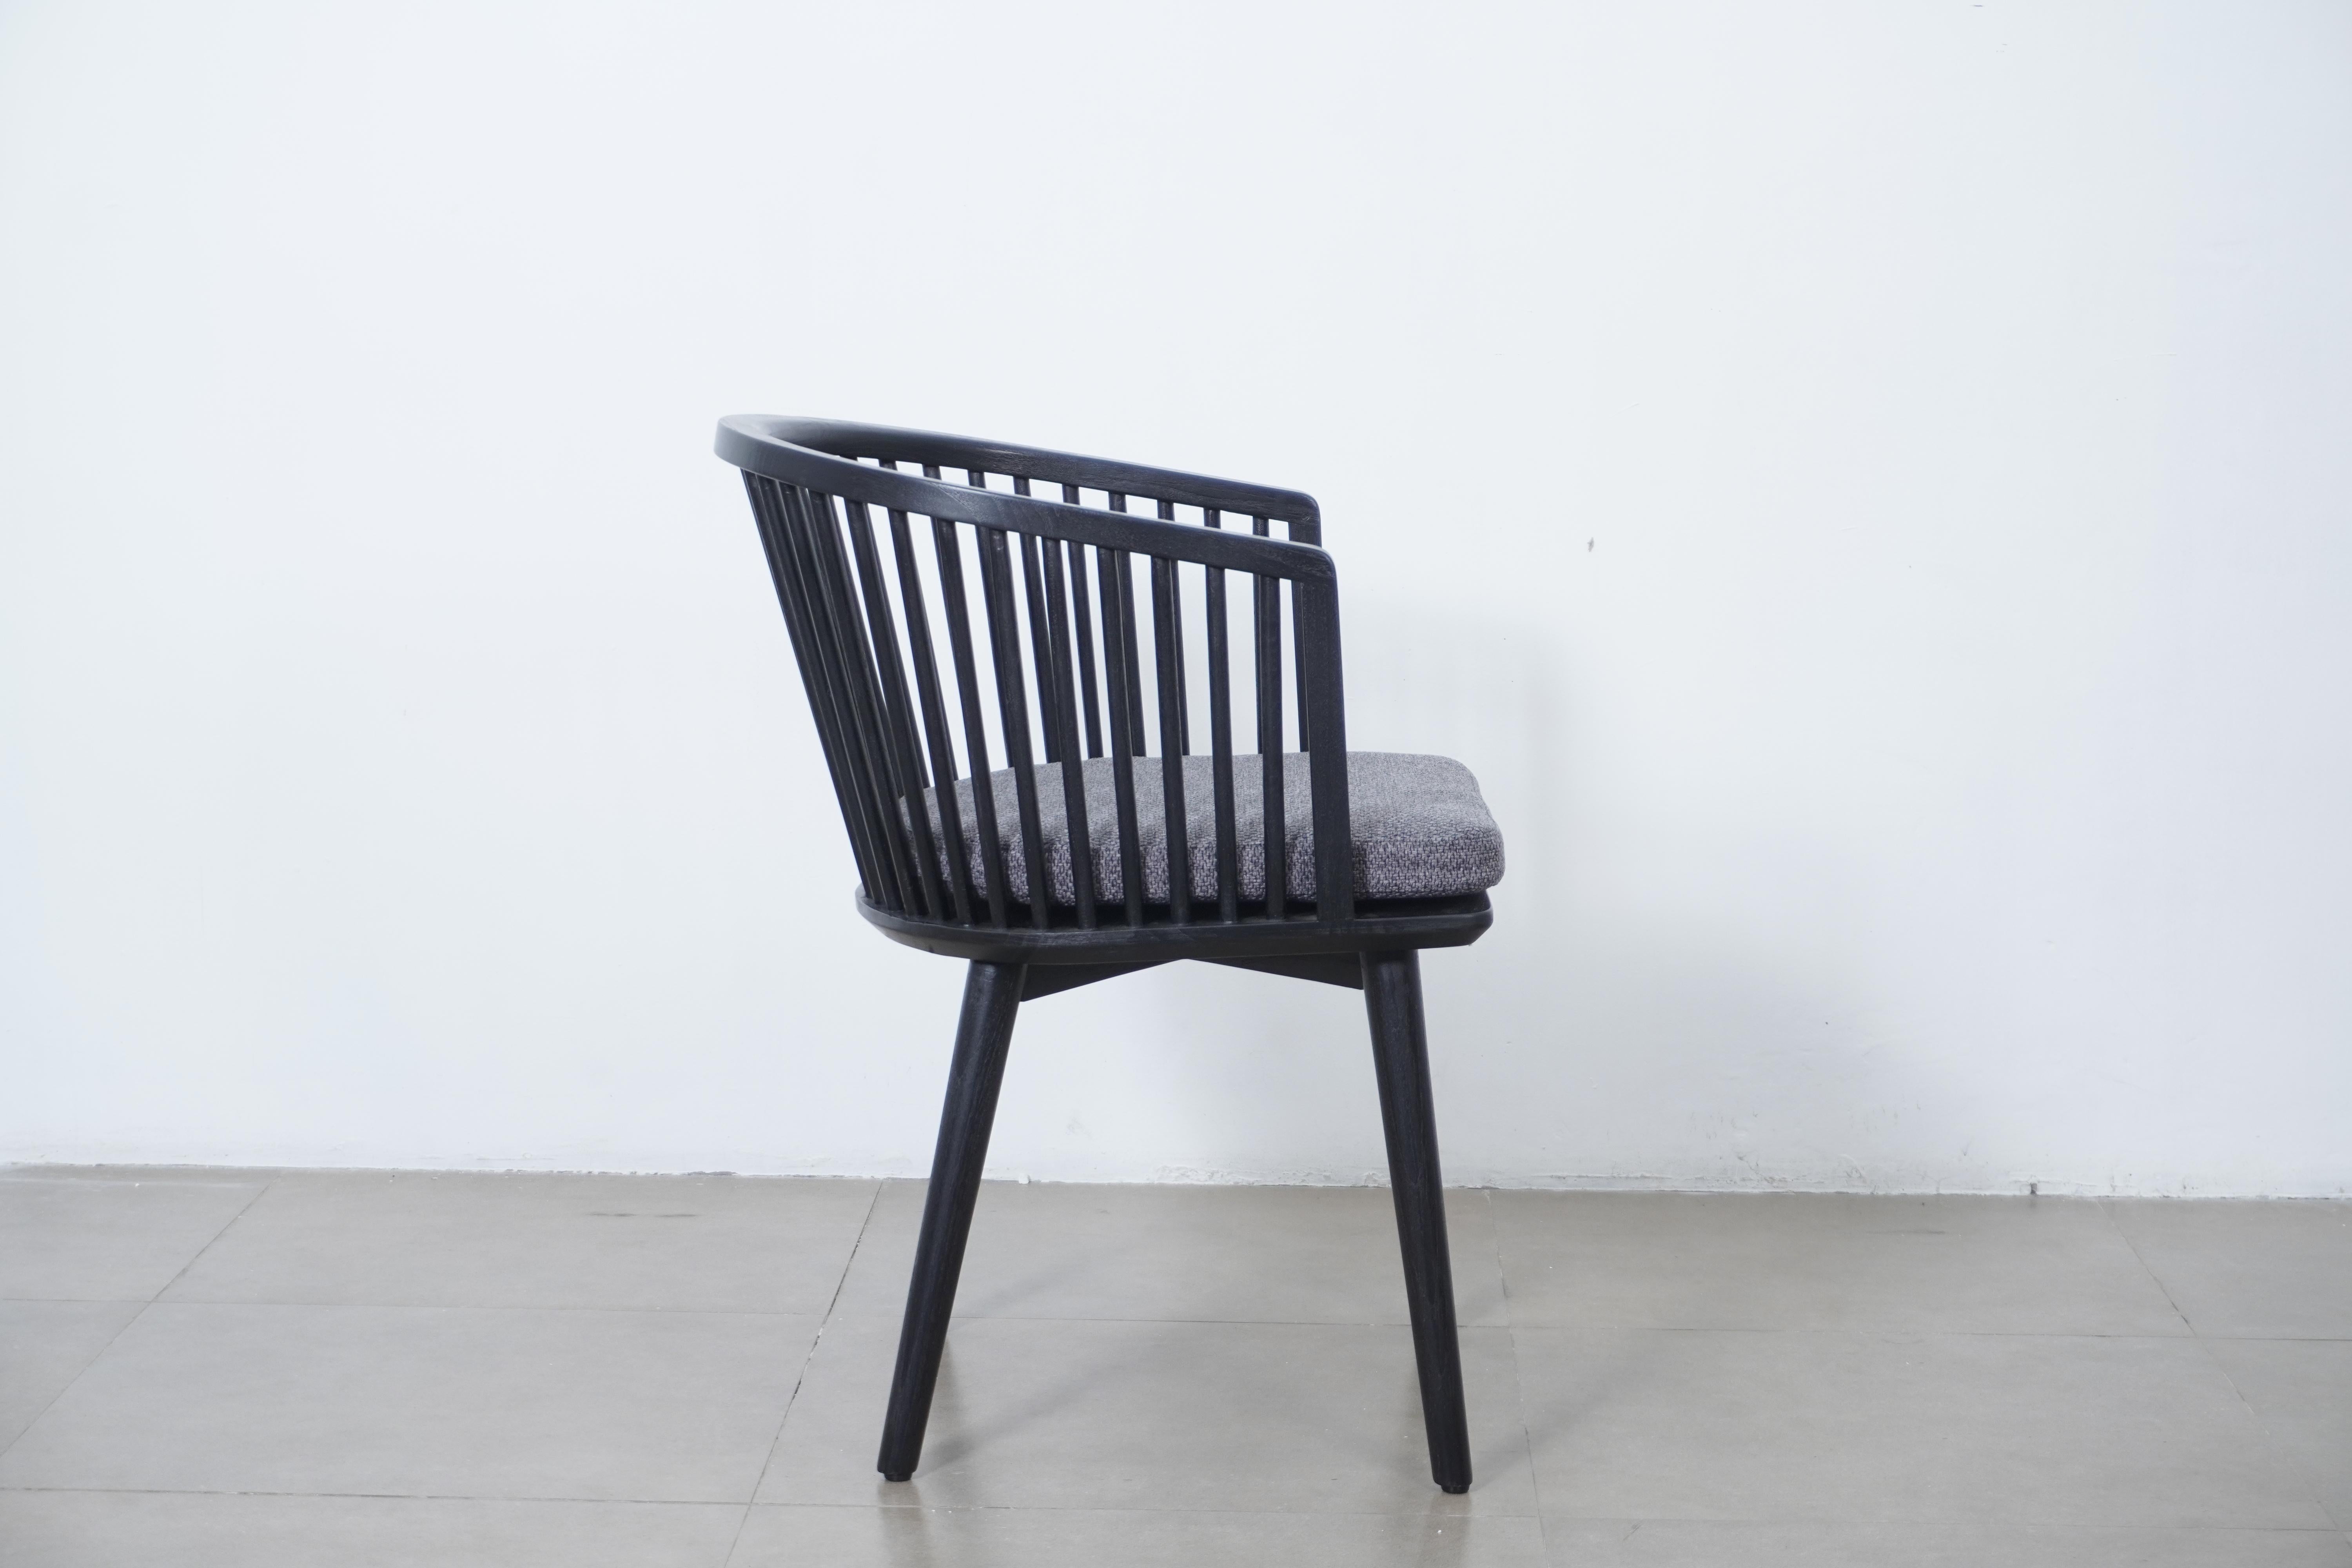 Fabric Modern Danish Peasant Dining Chair, Teak in Black Finish. Set of 6 chairs For Sale